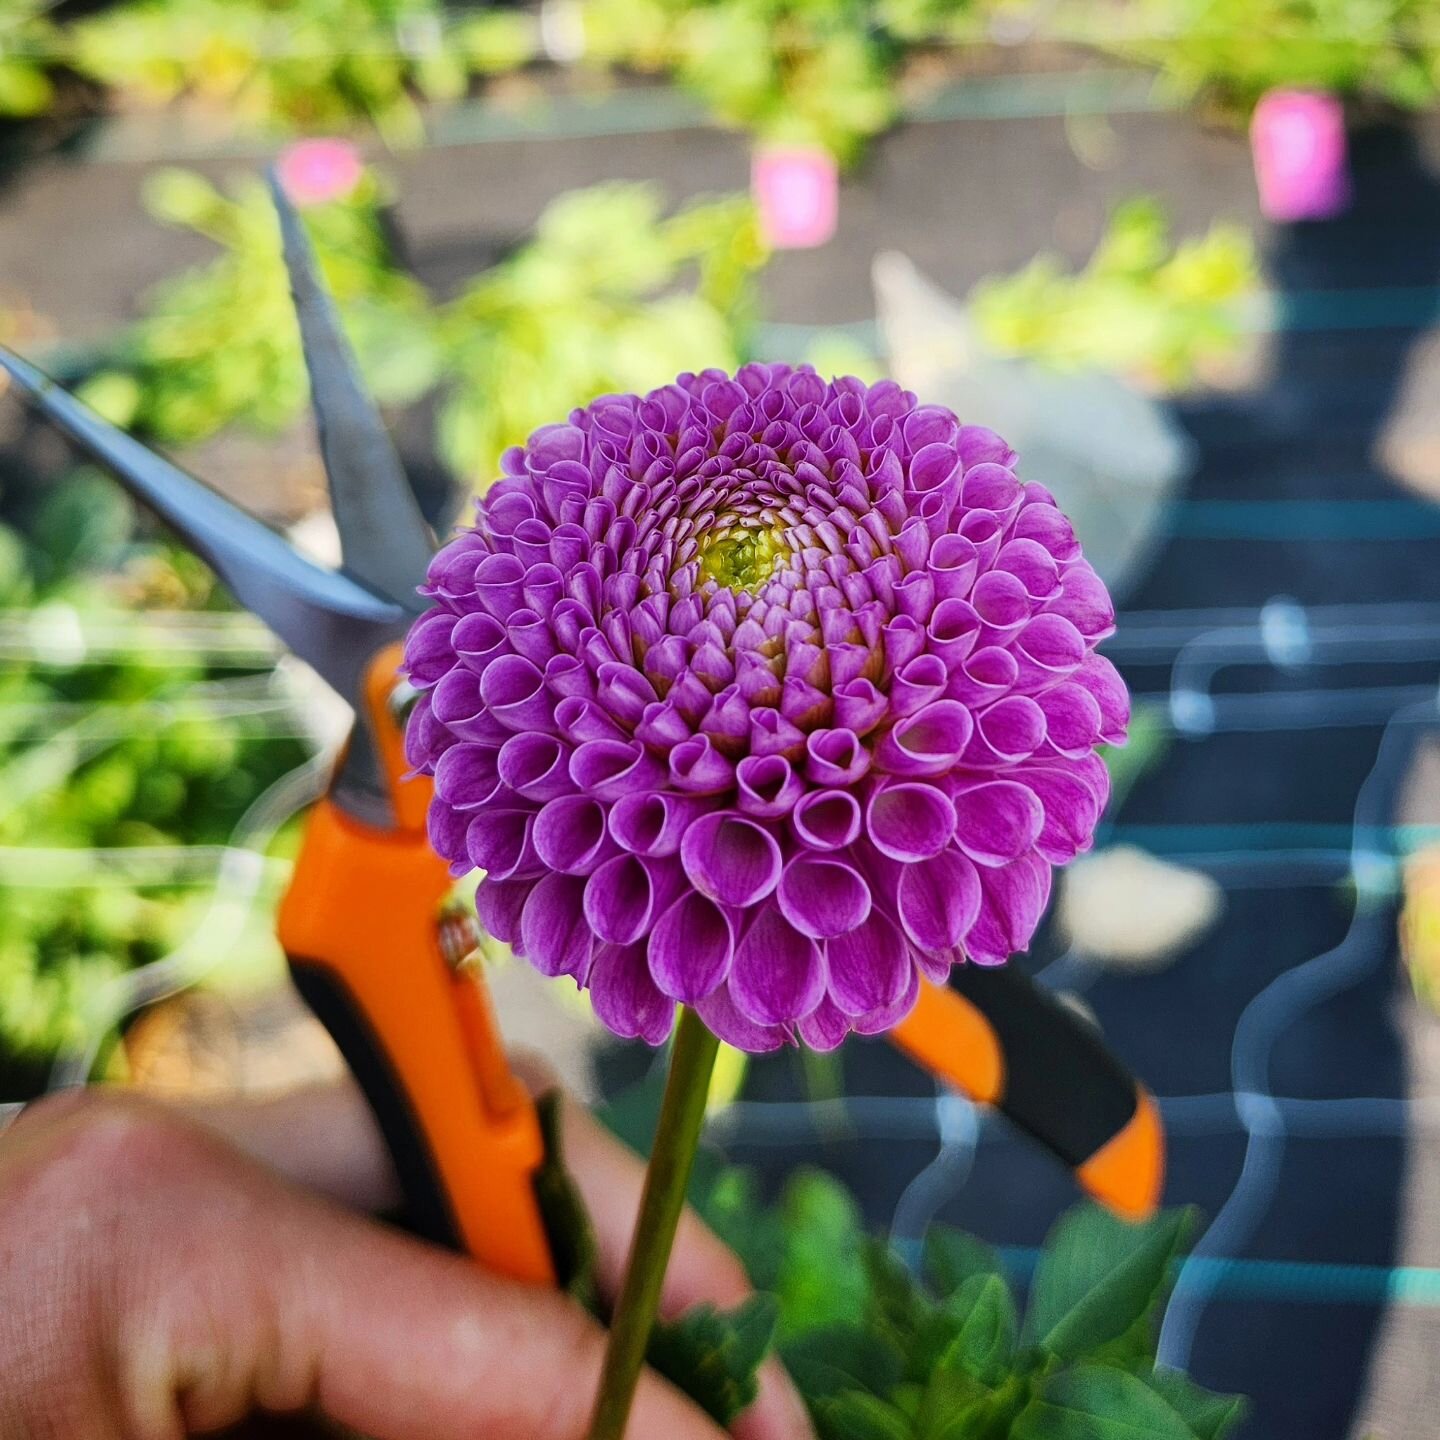 'Franz Kafka'

My daughter's favorite of all the varieties we grow.💜 Hybridized in 1974 by Maarse, these darling  2&quot; blooms are perfect spheres on a 3.5' plant.  Named after the bohemian author known for his kind spirit and bizzare writings. 

